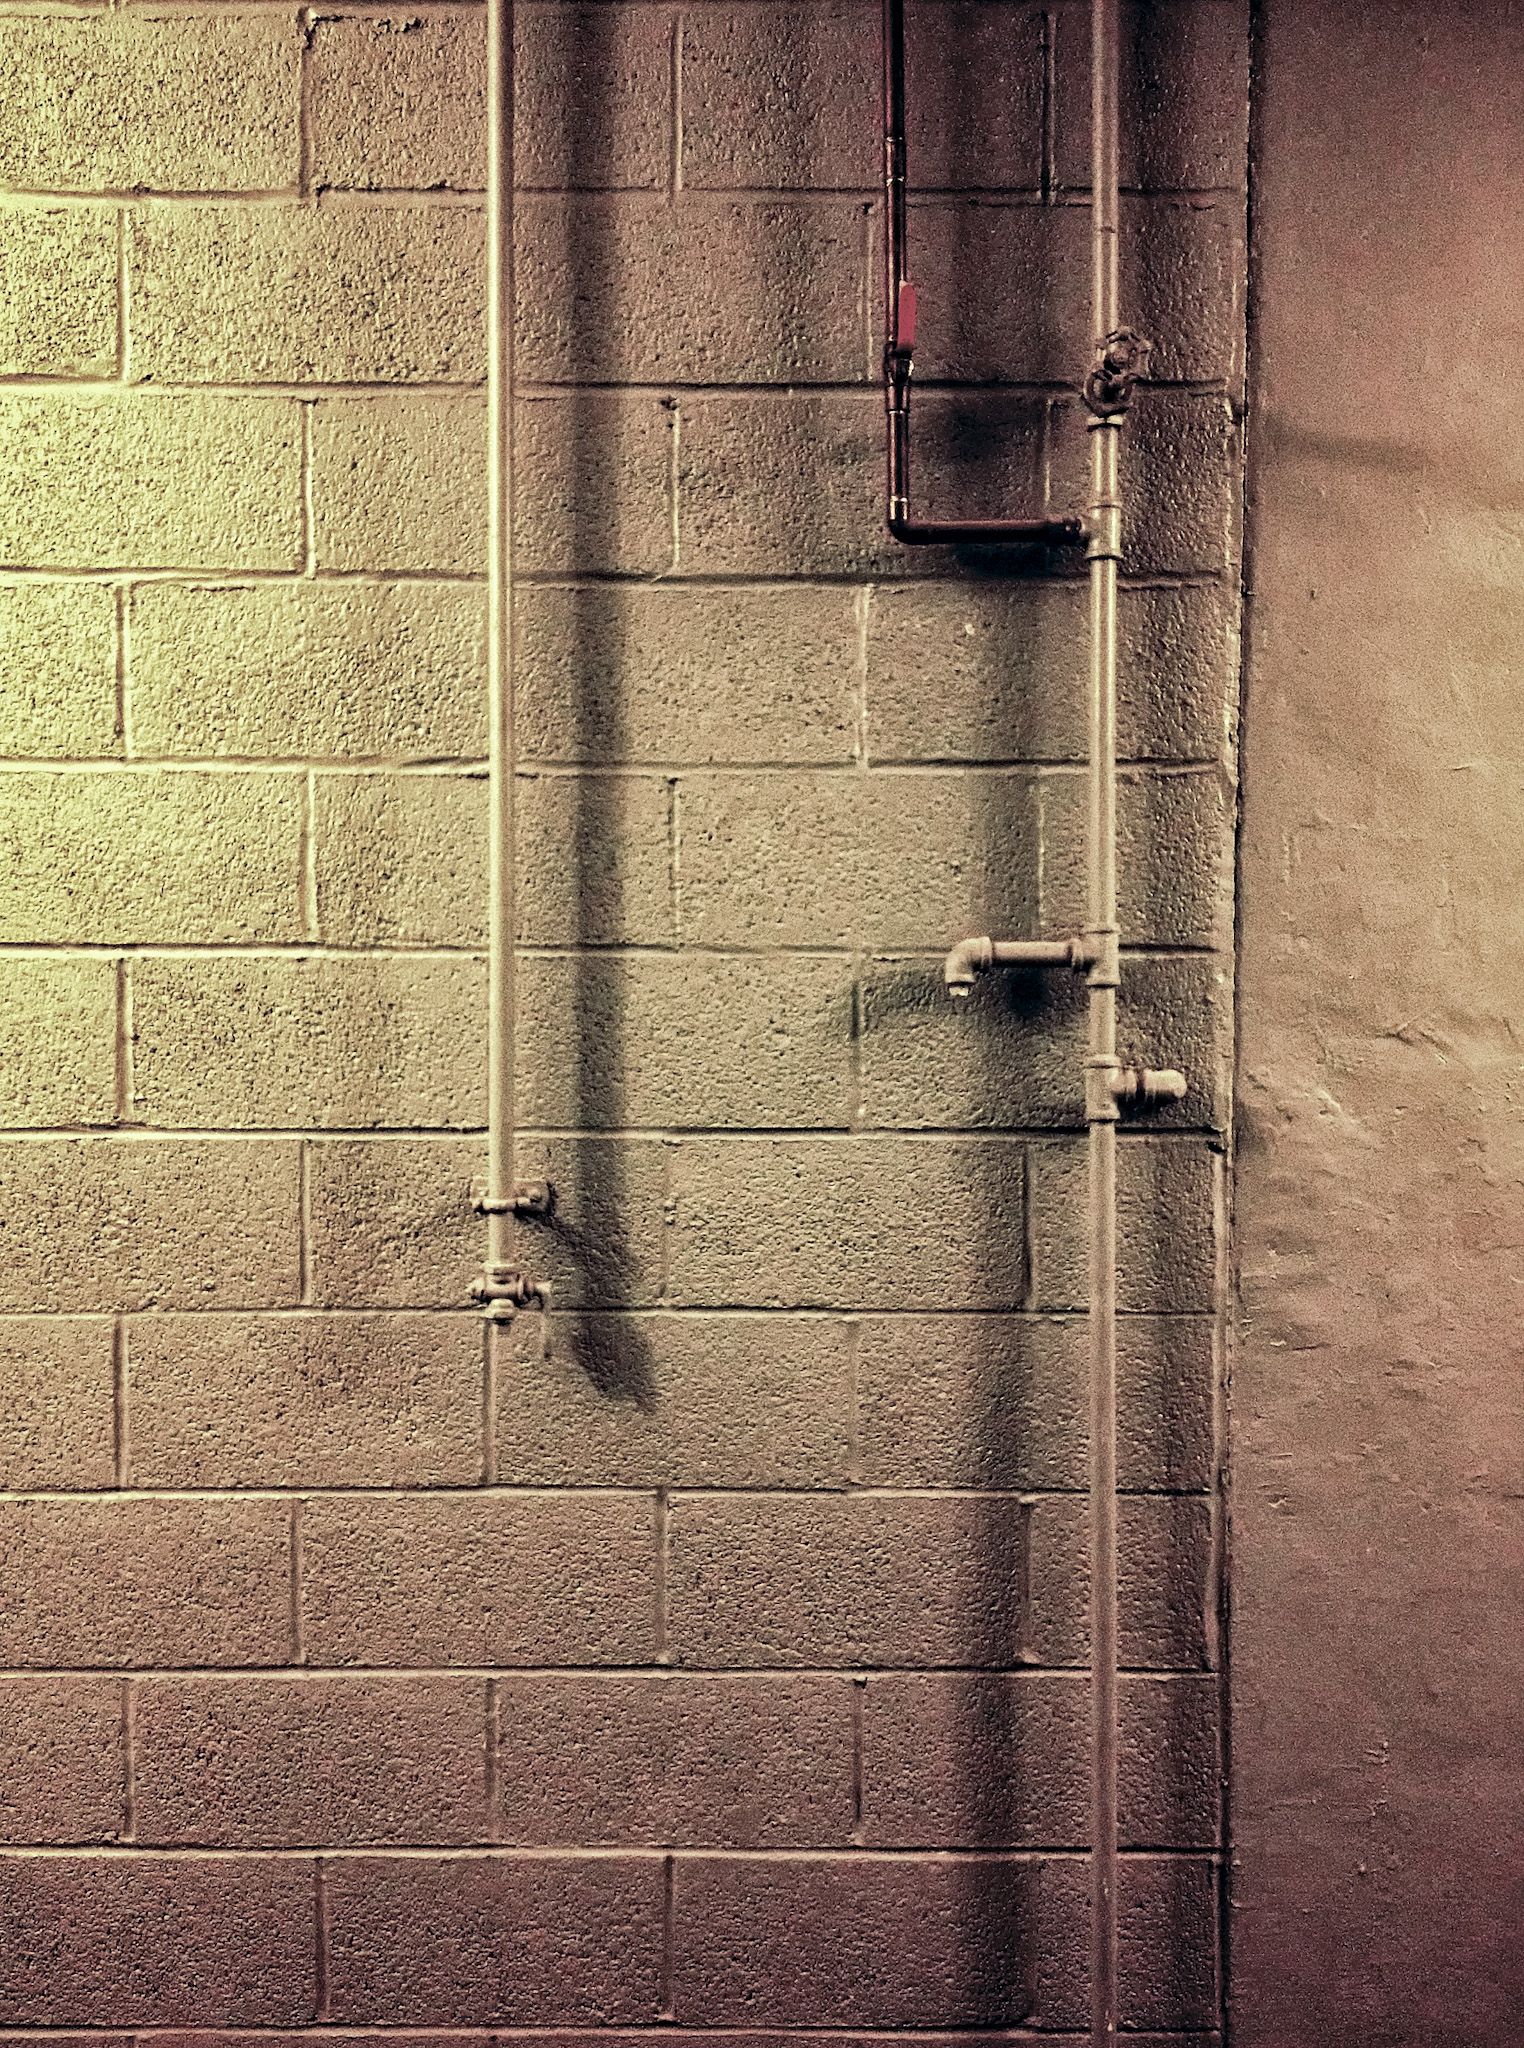 Pipes on a Wall #iPhone #pipes #wall | Images - iPhone | Pinterest